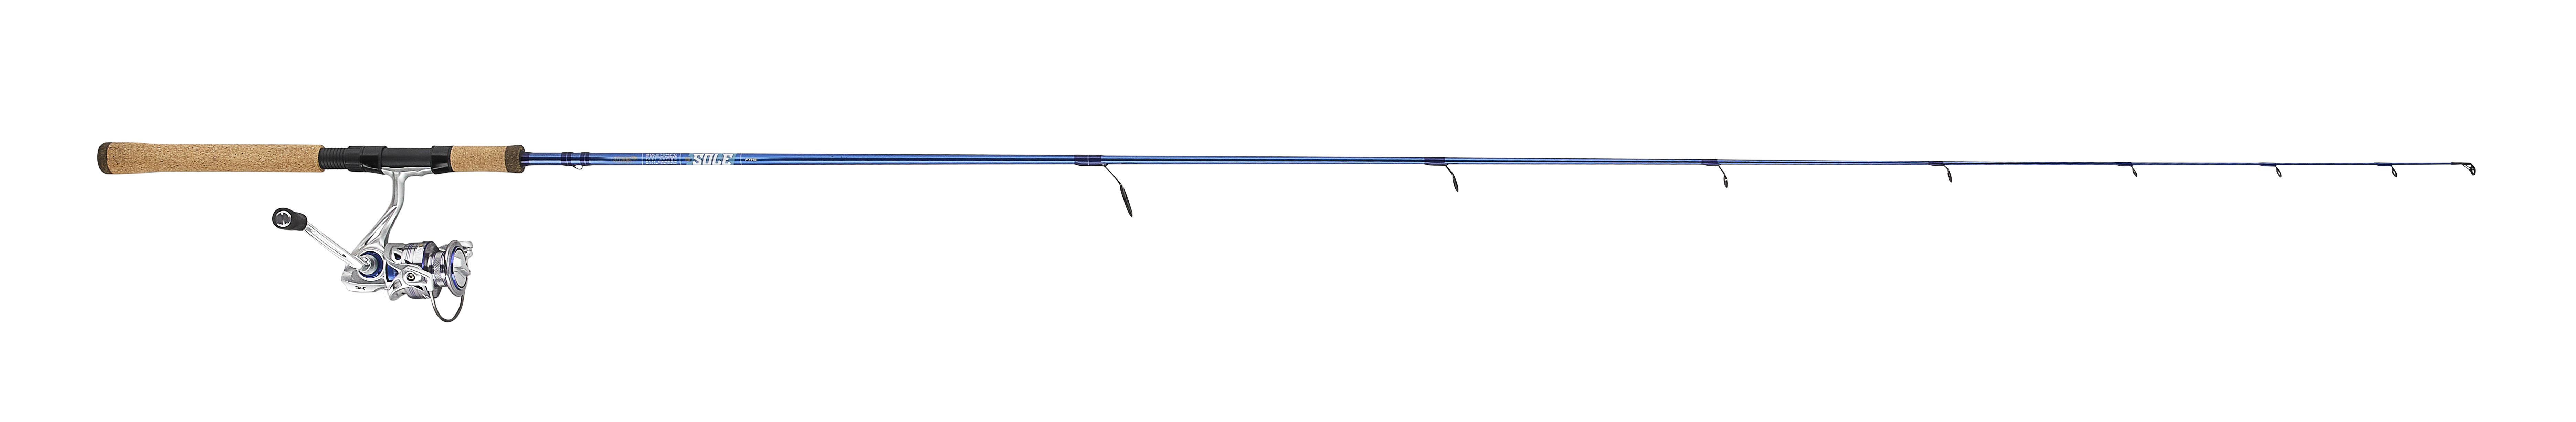 St. Croix Sole Inshore Fishing System